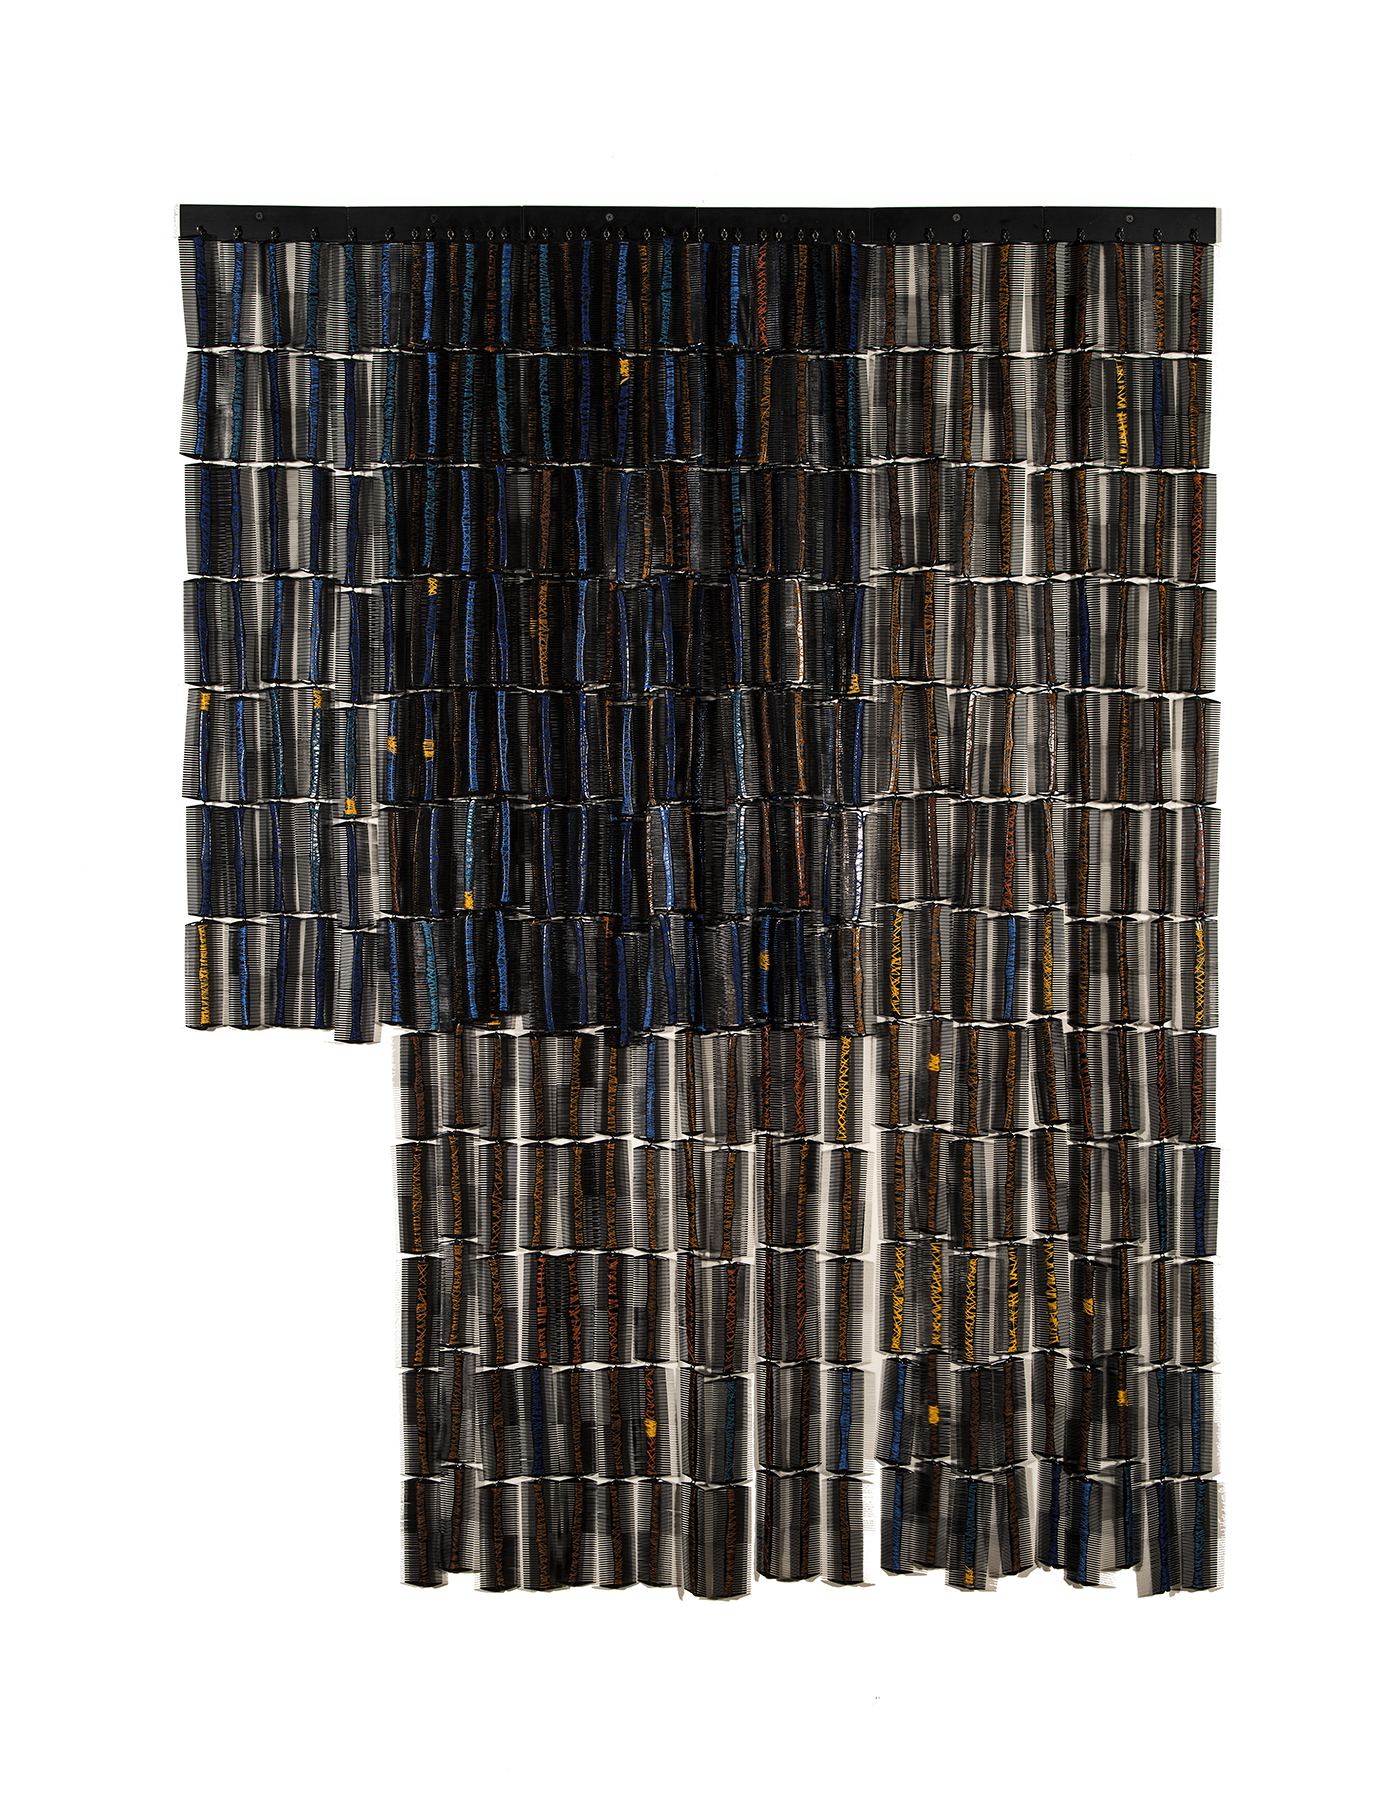 Sonya Clark, "Thread Wrapped in Blue and Brown," 2008. Combs, thread. Photo by Craig Smith, courtesy Arizona State University Art Museum.